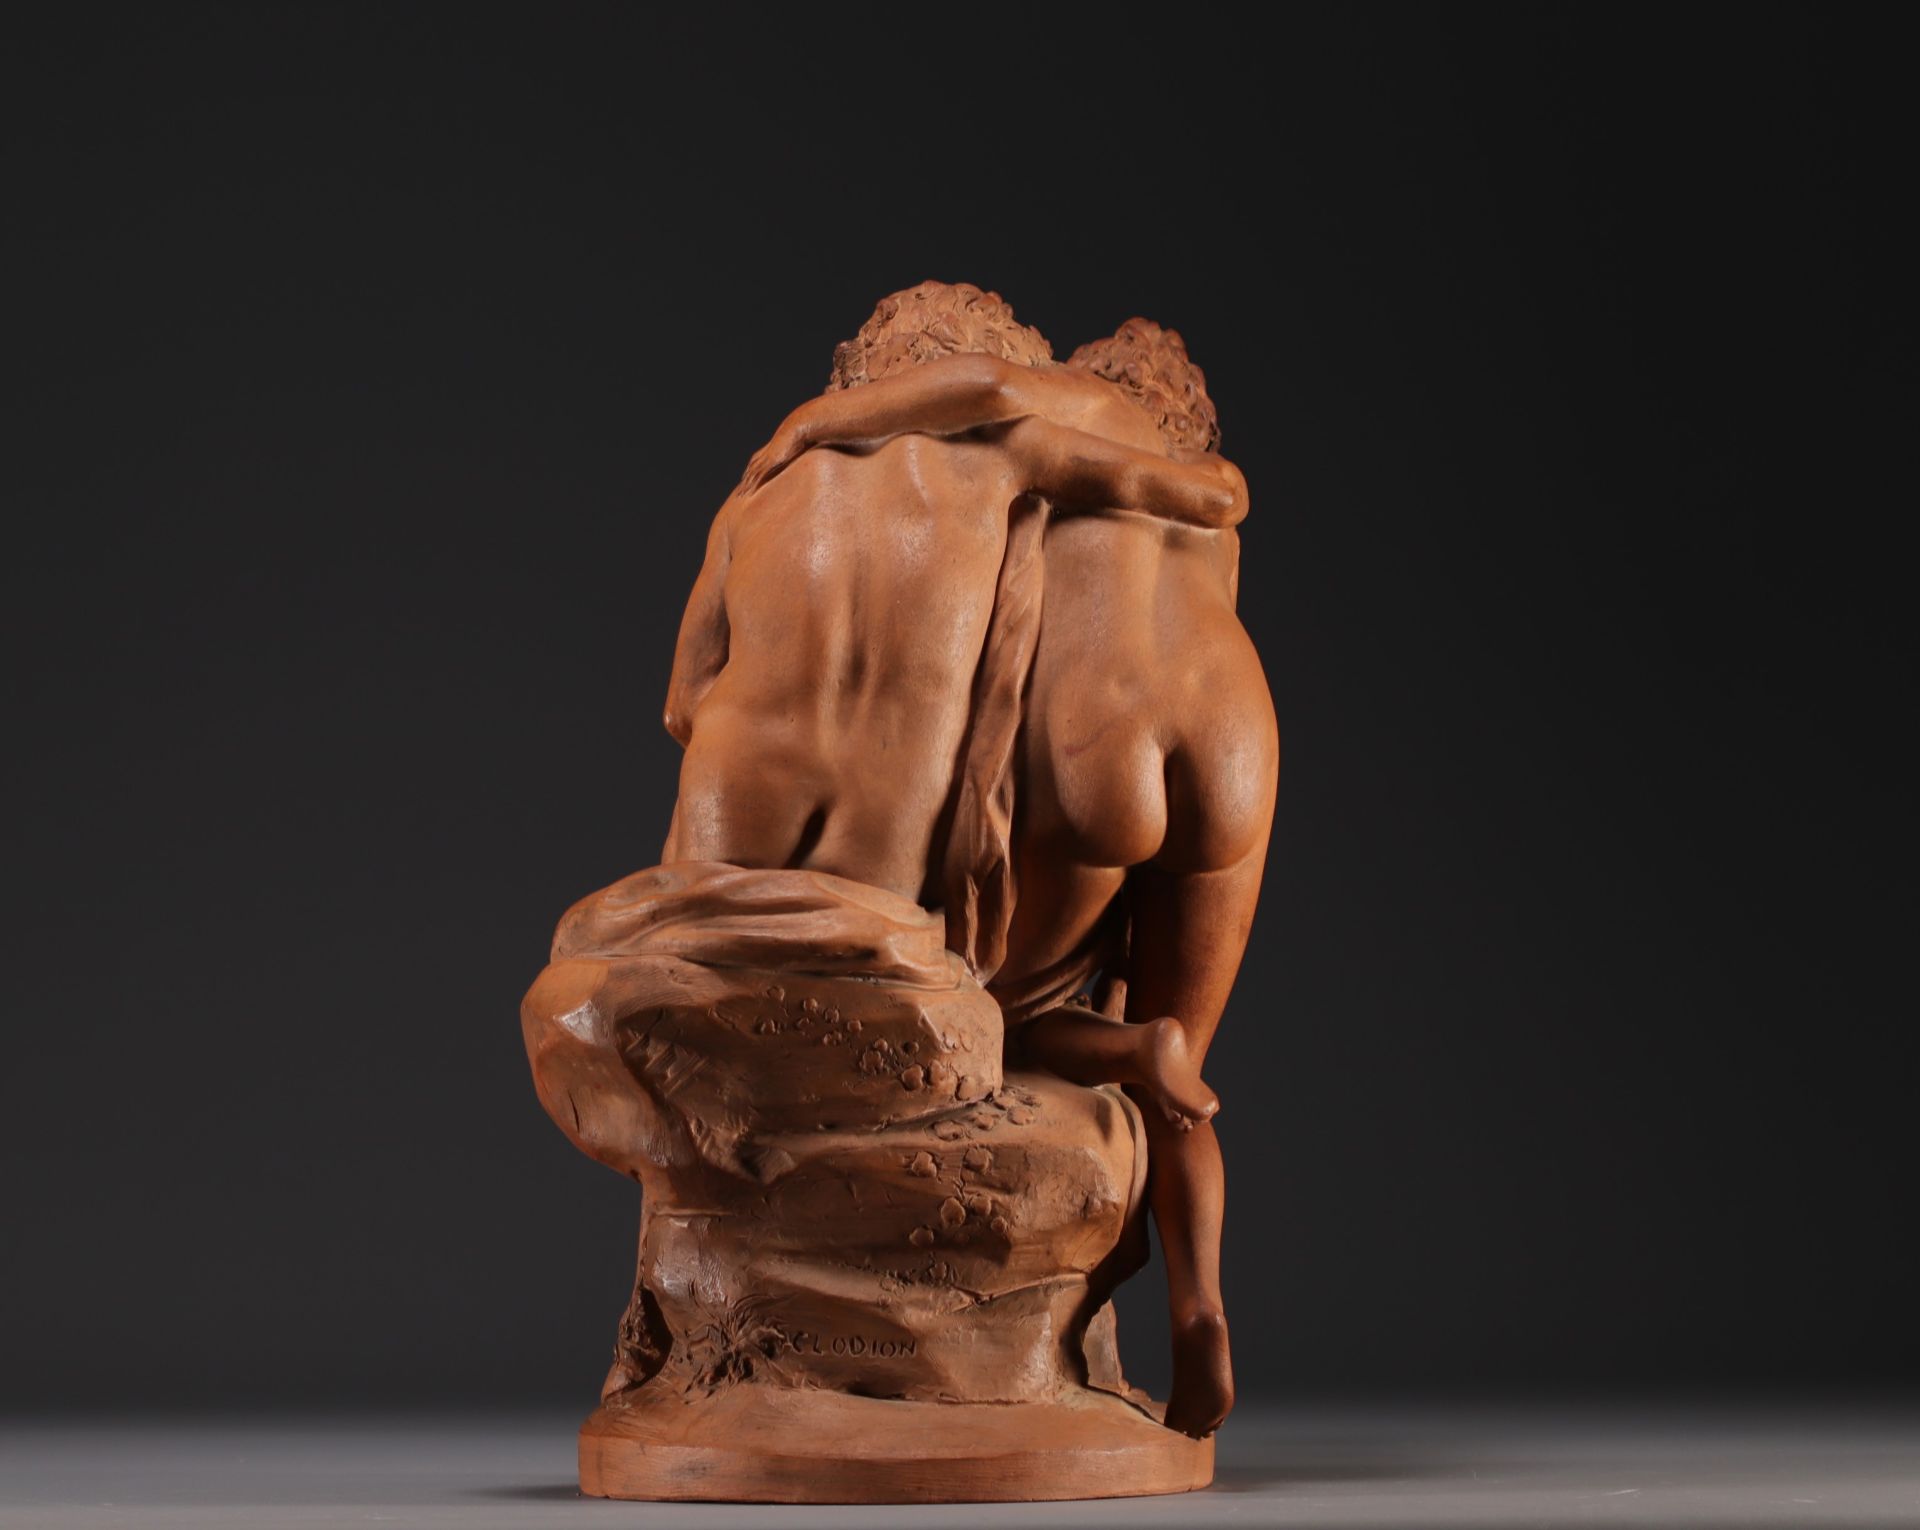 Claude Michel CLODION (1738-1814) after, "Nymph and Faun", terracotta sculpture. - Image 4 of 5